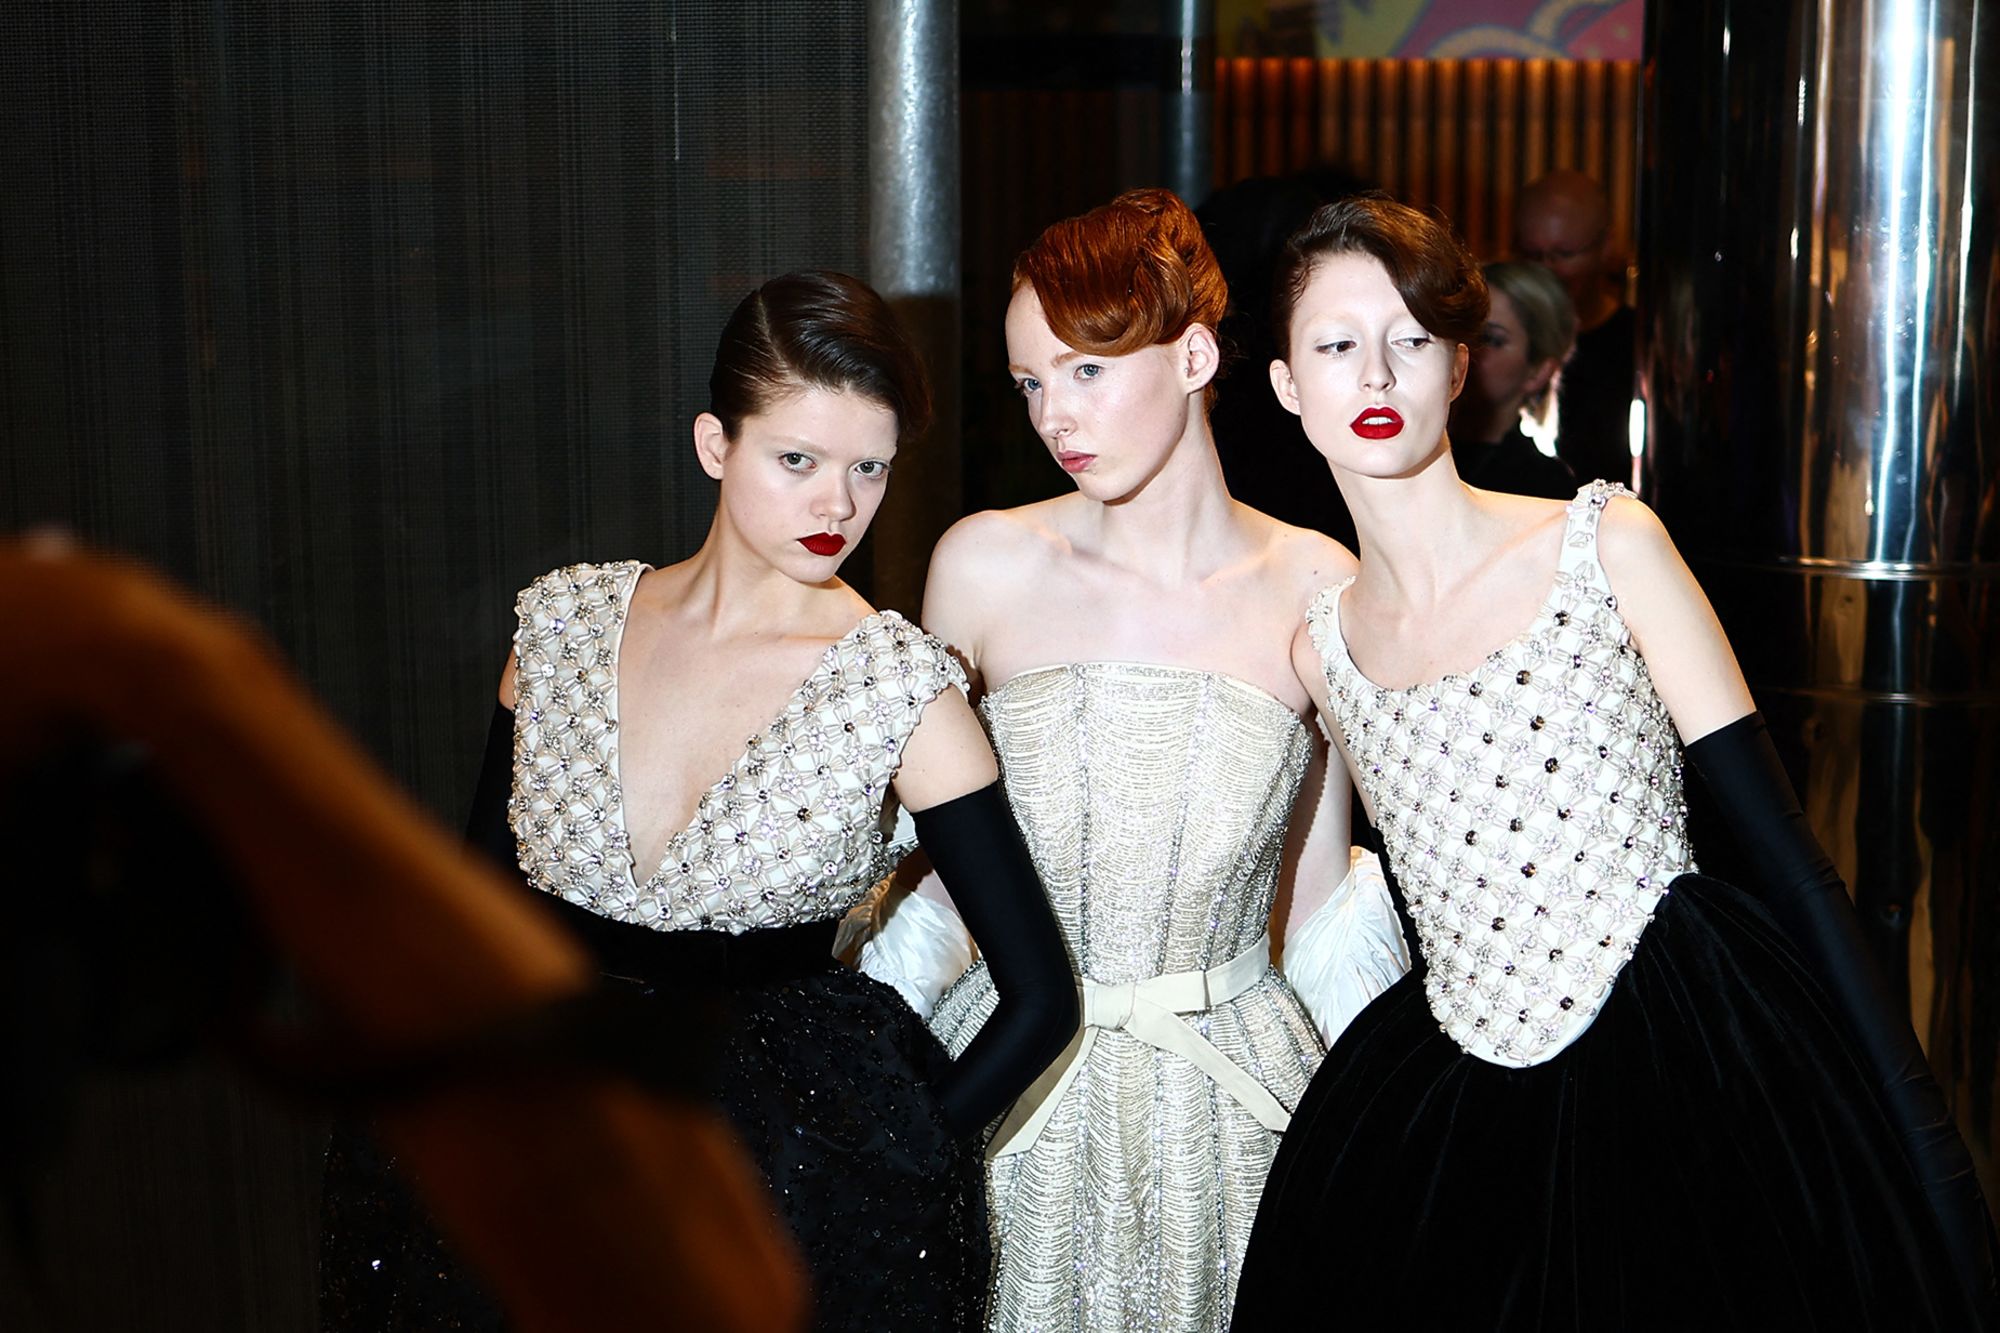 Models gather backstage at the Richard Quinn show during London Fashion Week.